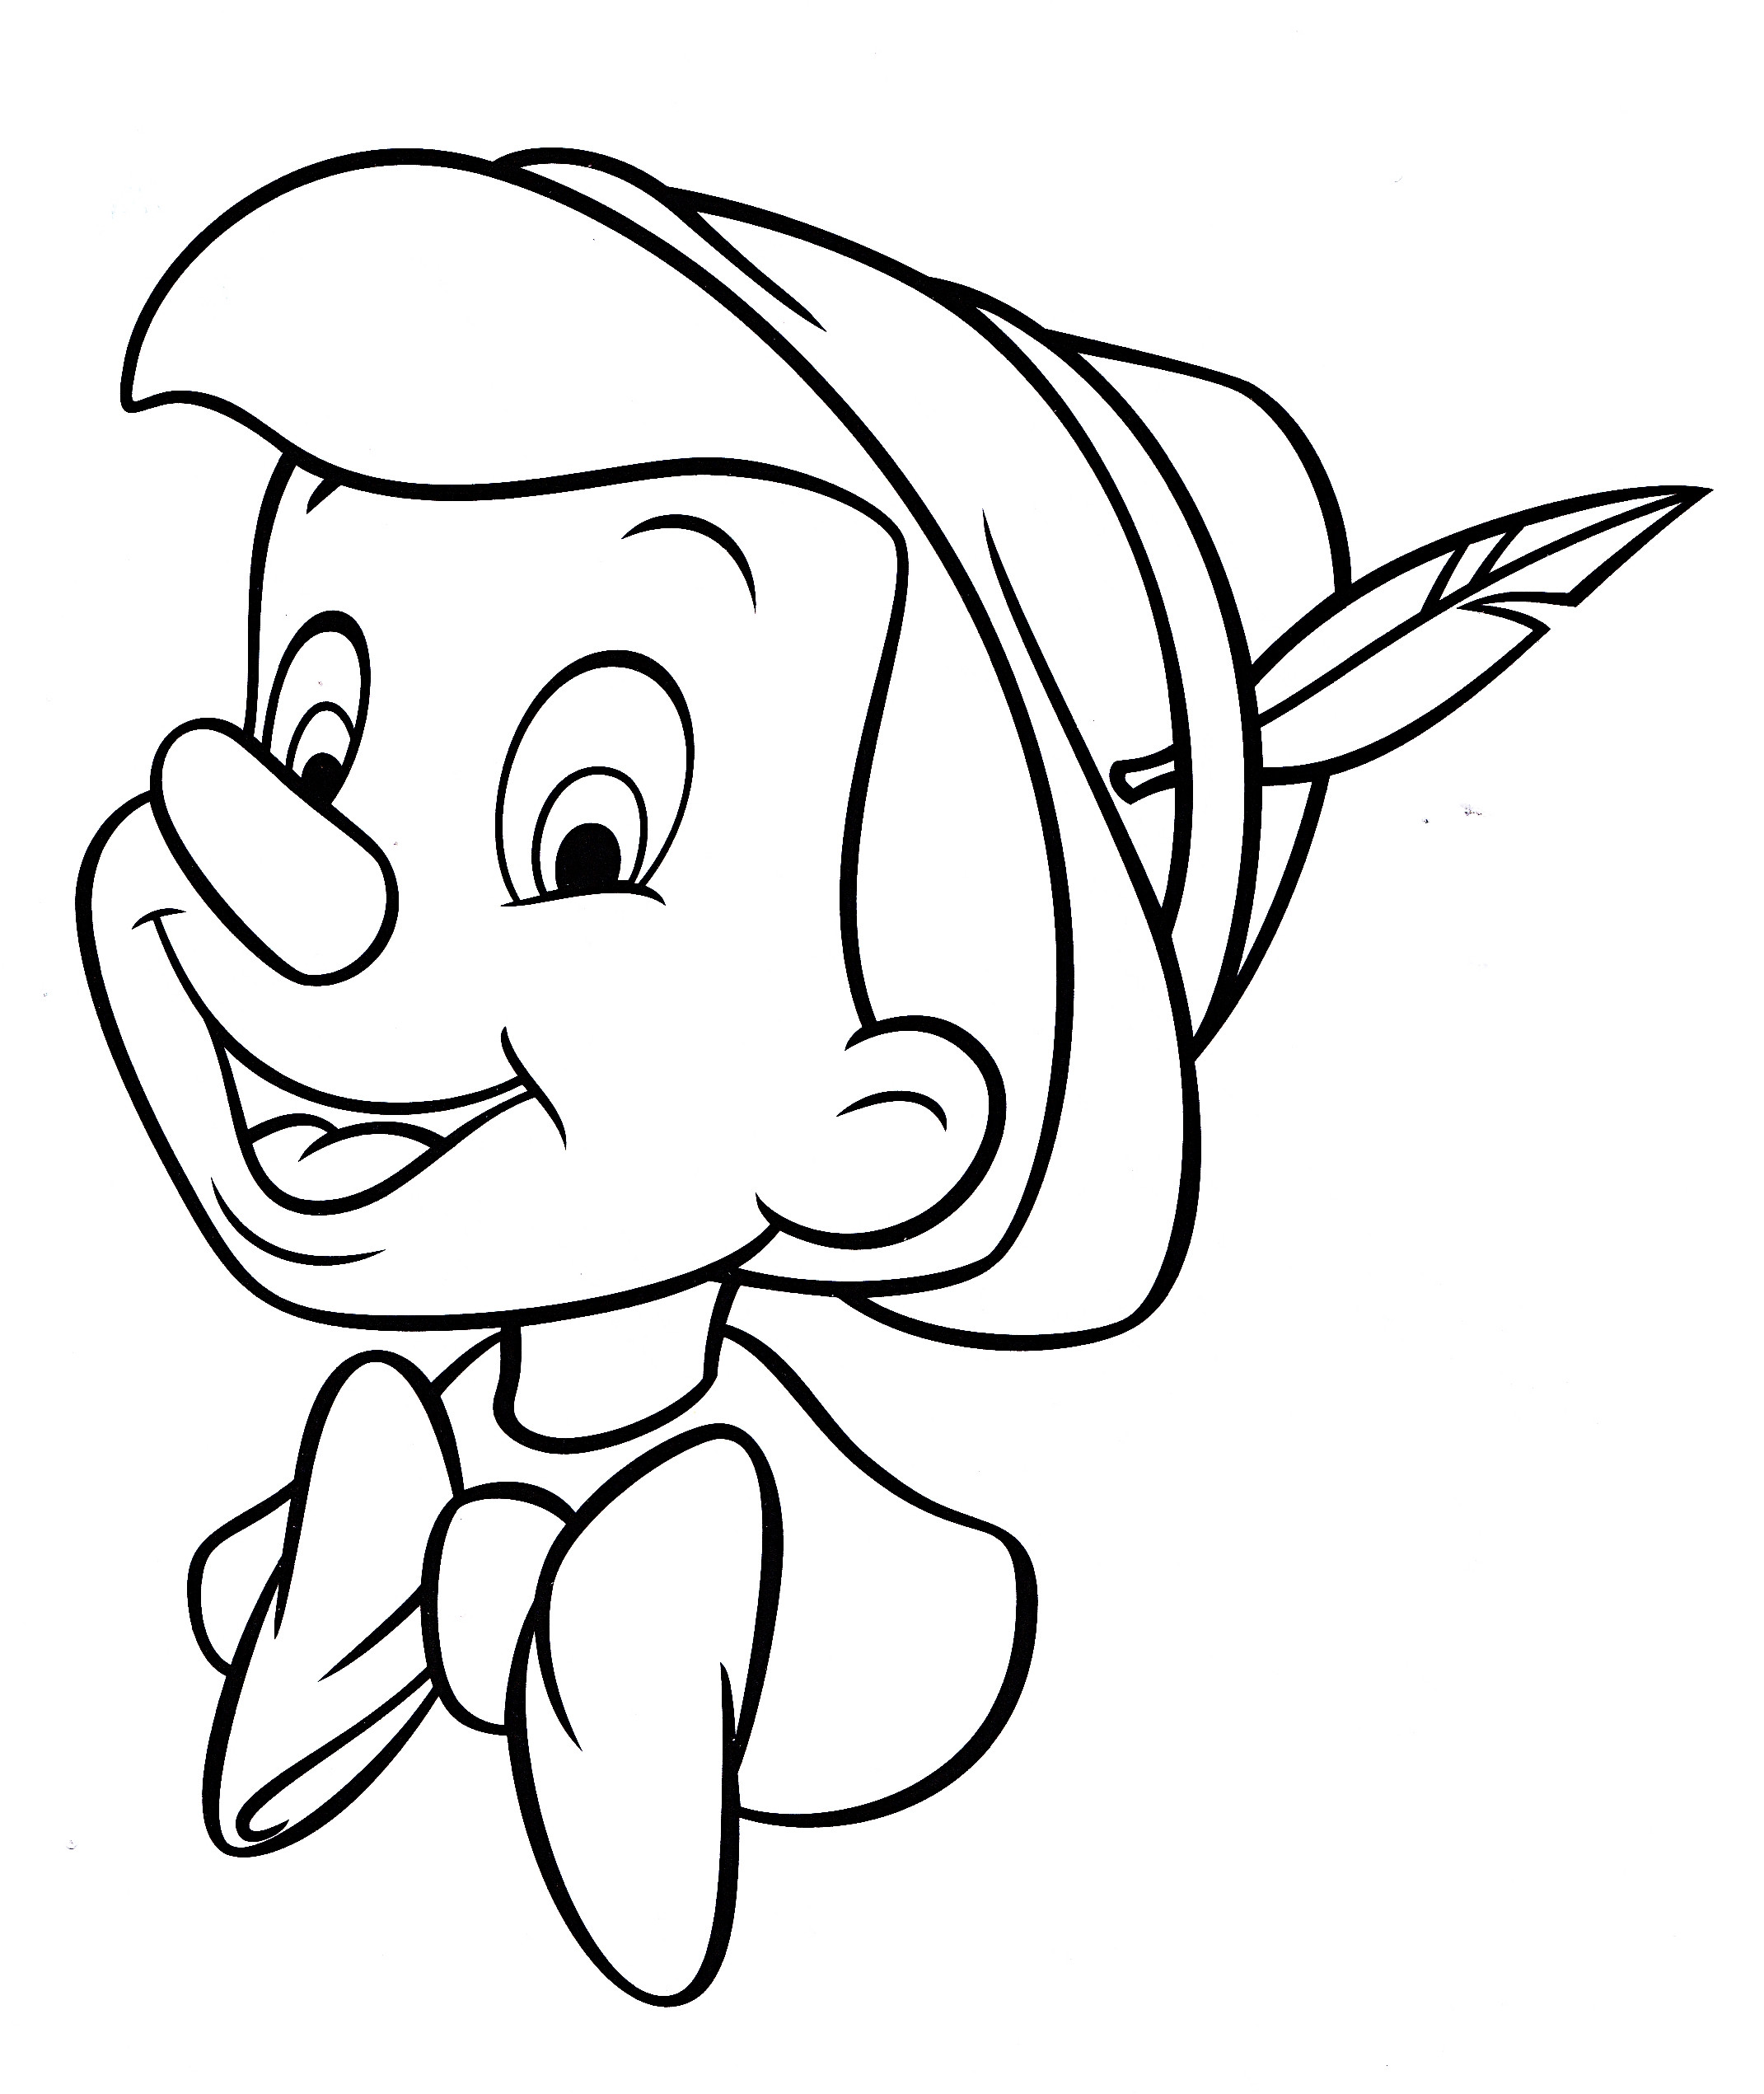 Coloring Pages Of Disney Characters
 Disney Characters Coloring Pages coloringsuite